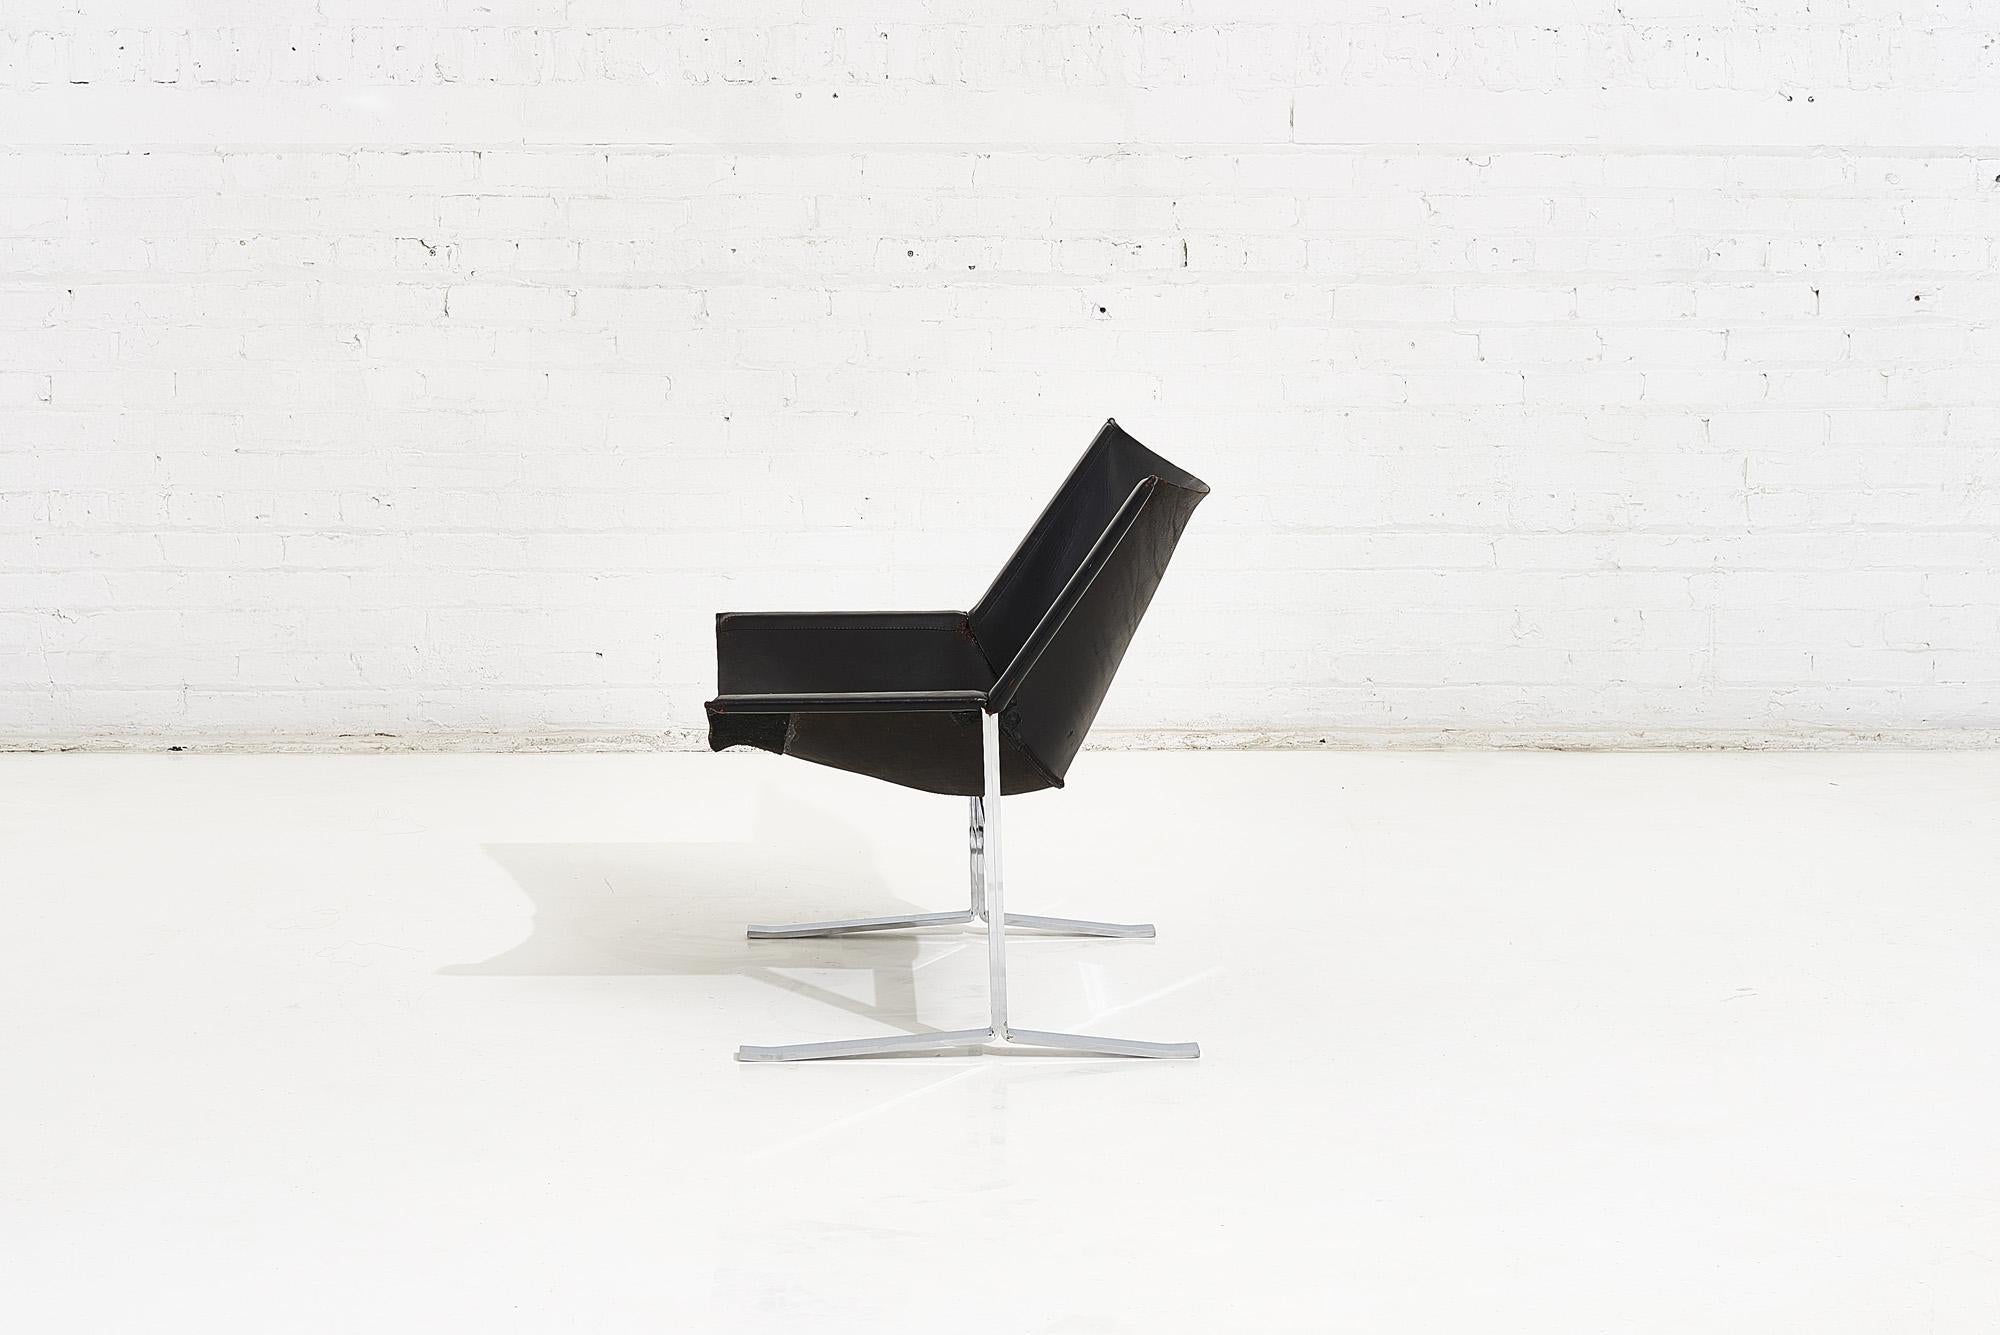 Sling chair model 248 by Clement Meadmore, circa 1970. Chrome plated steel base. Three black reinforcement panels have been added to underside to reinforce vintage leather.